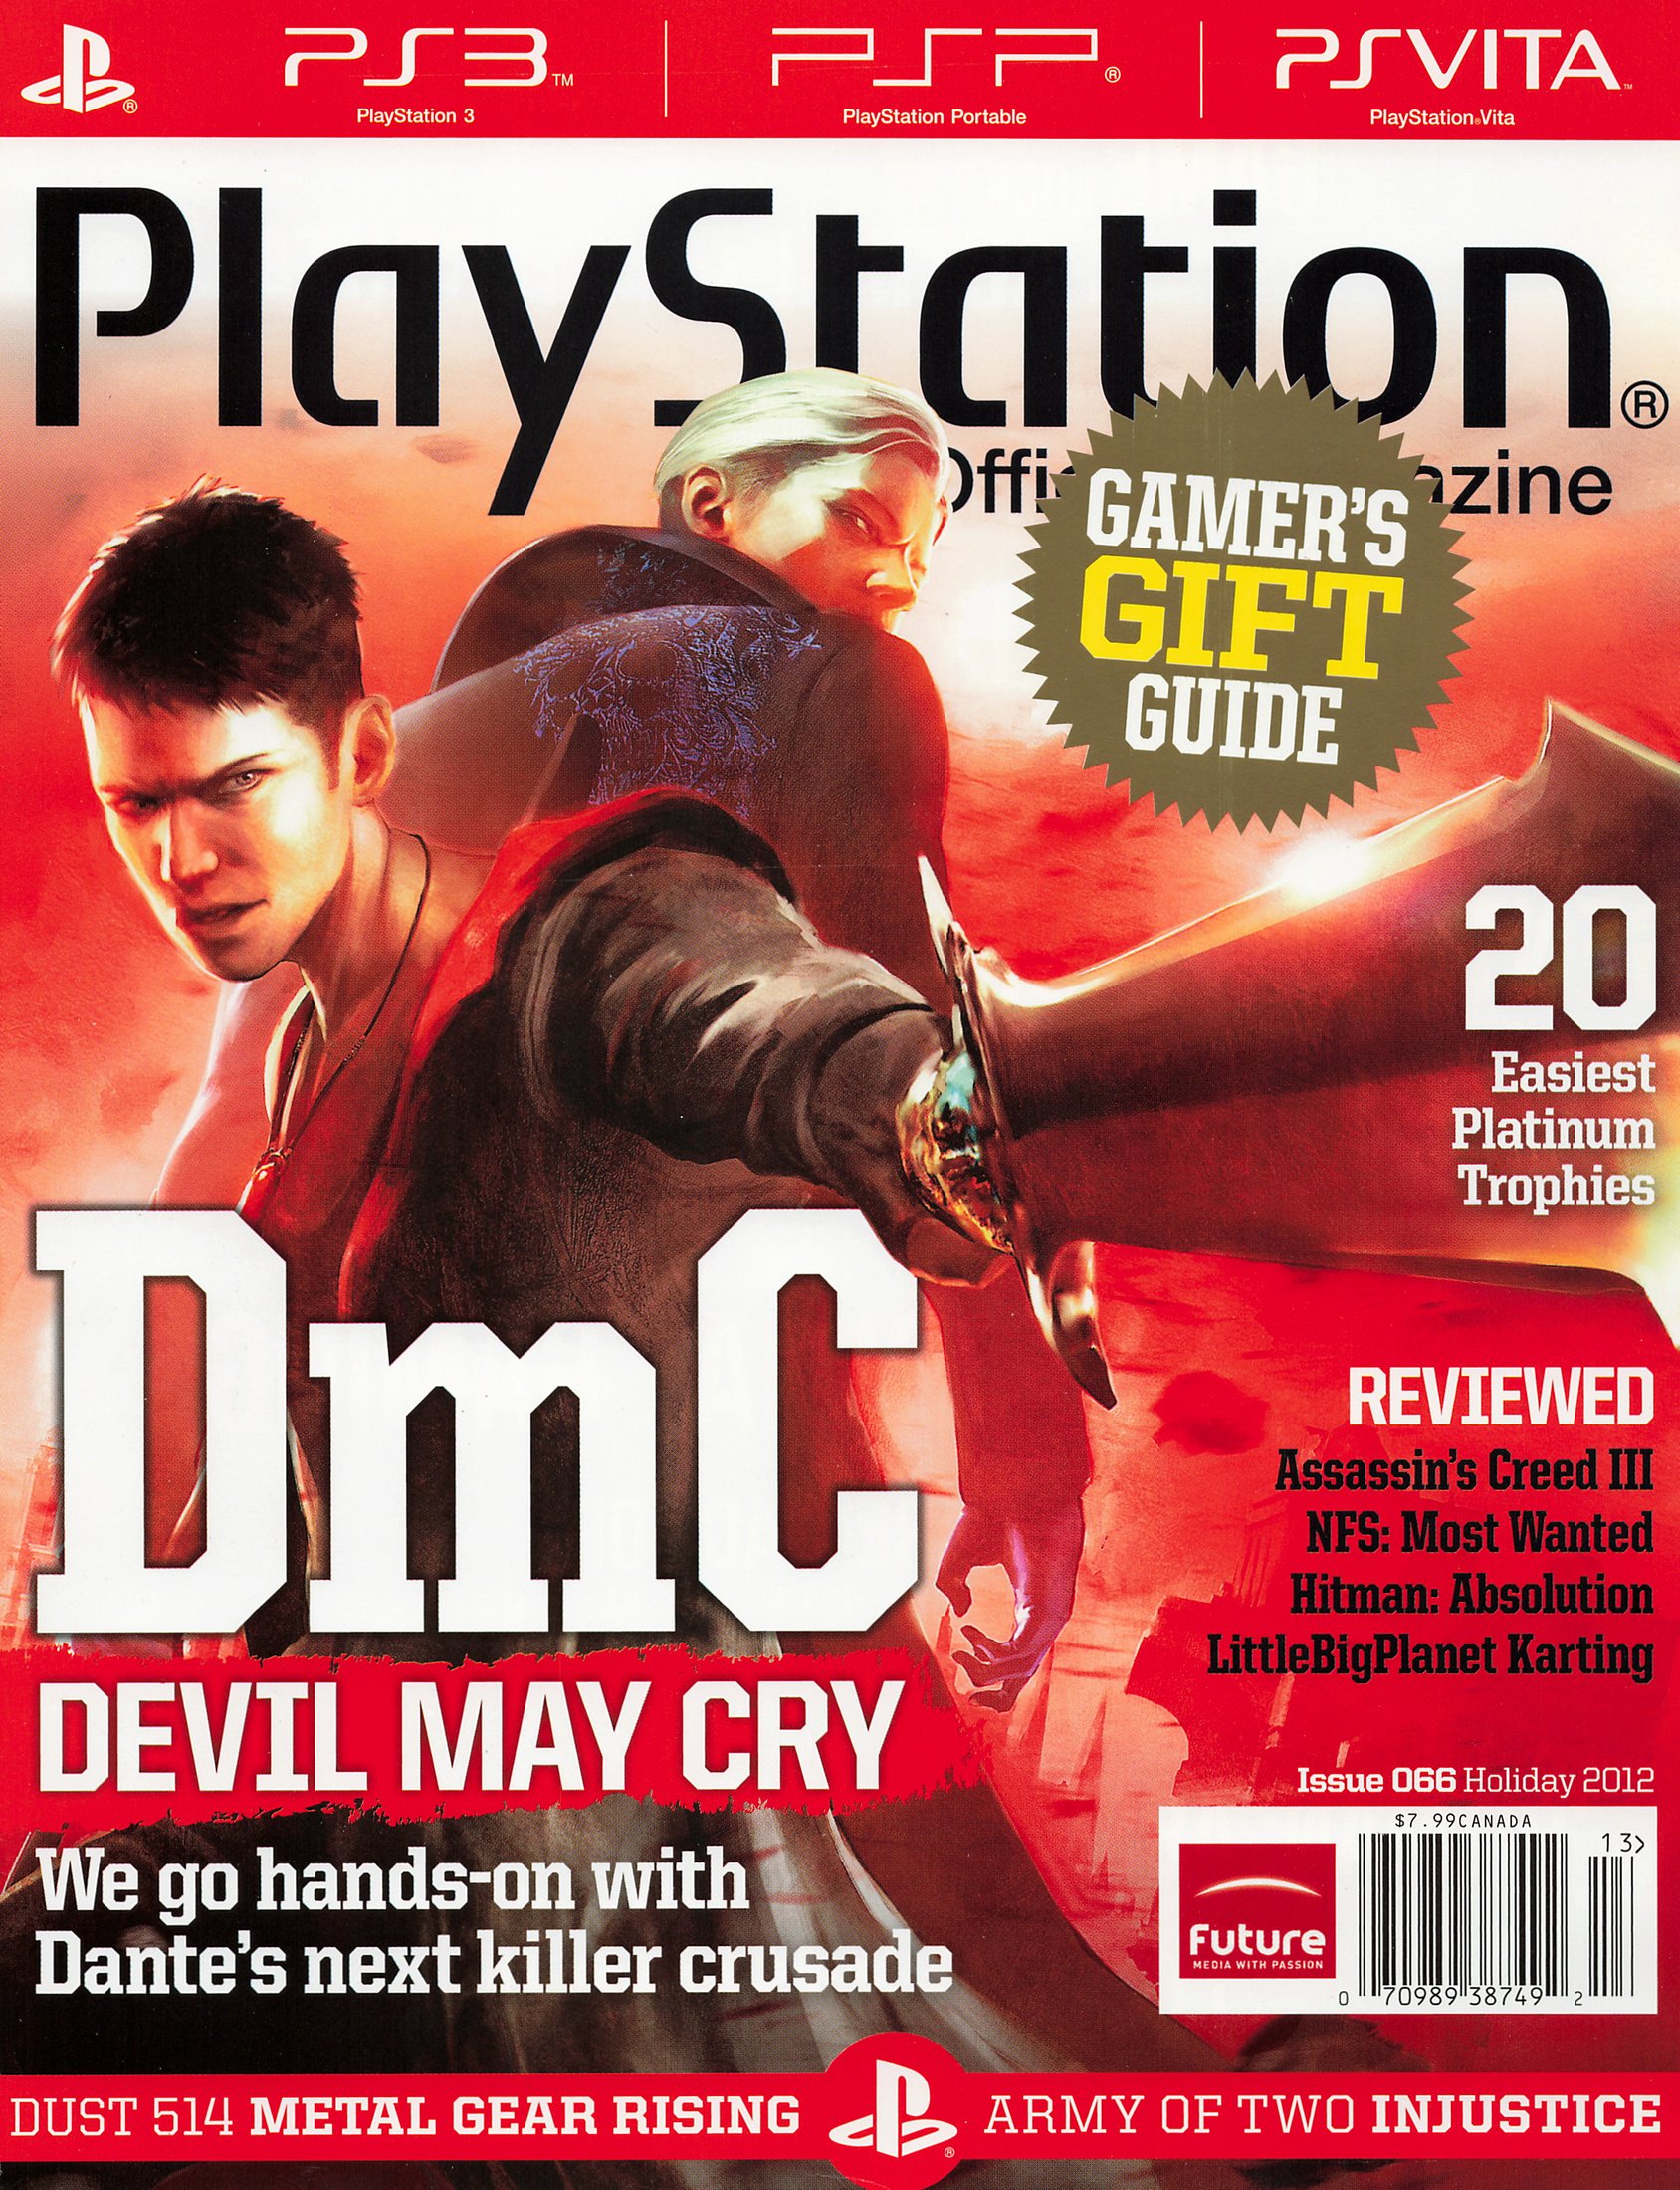 Playstation: The Official Magazine Issue 66 (Holiday 2012)